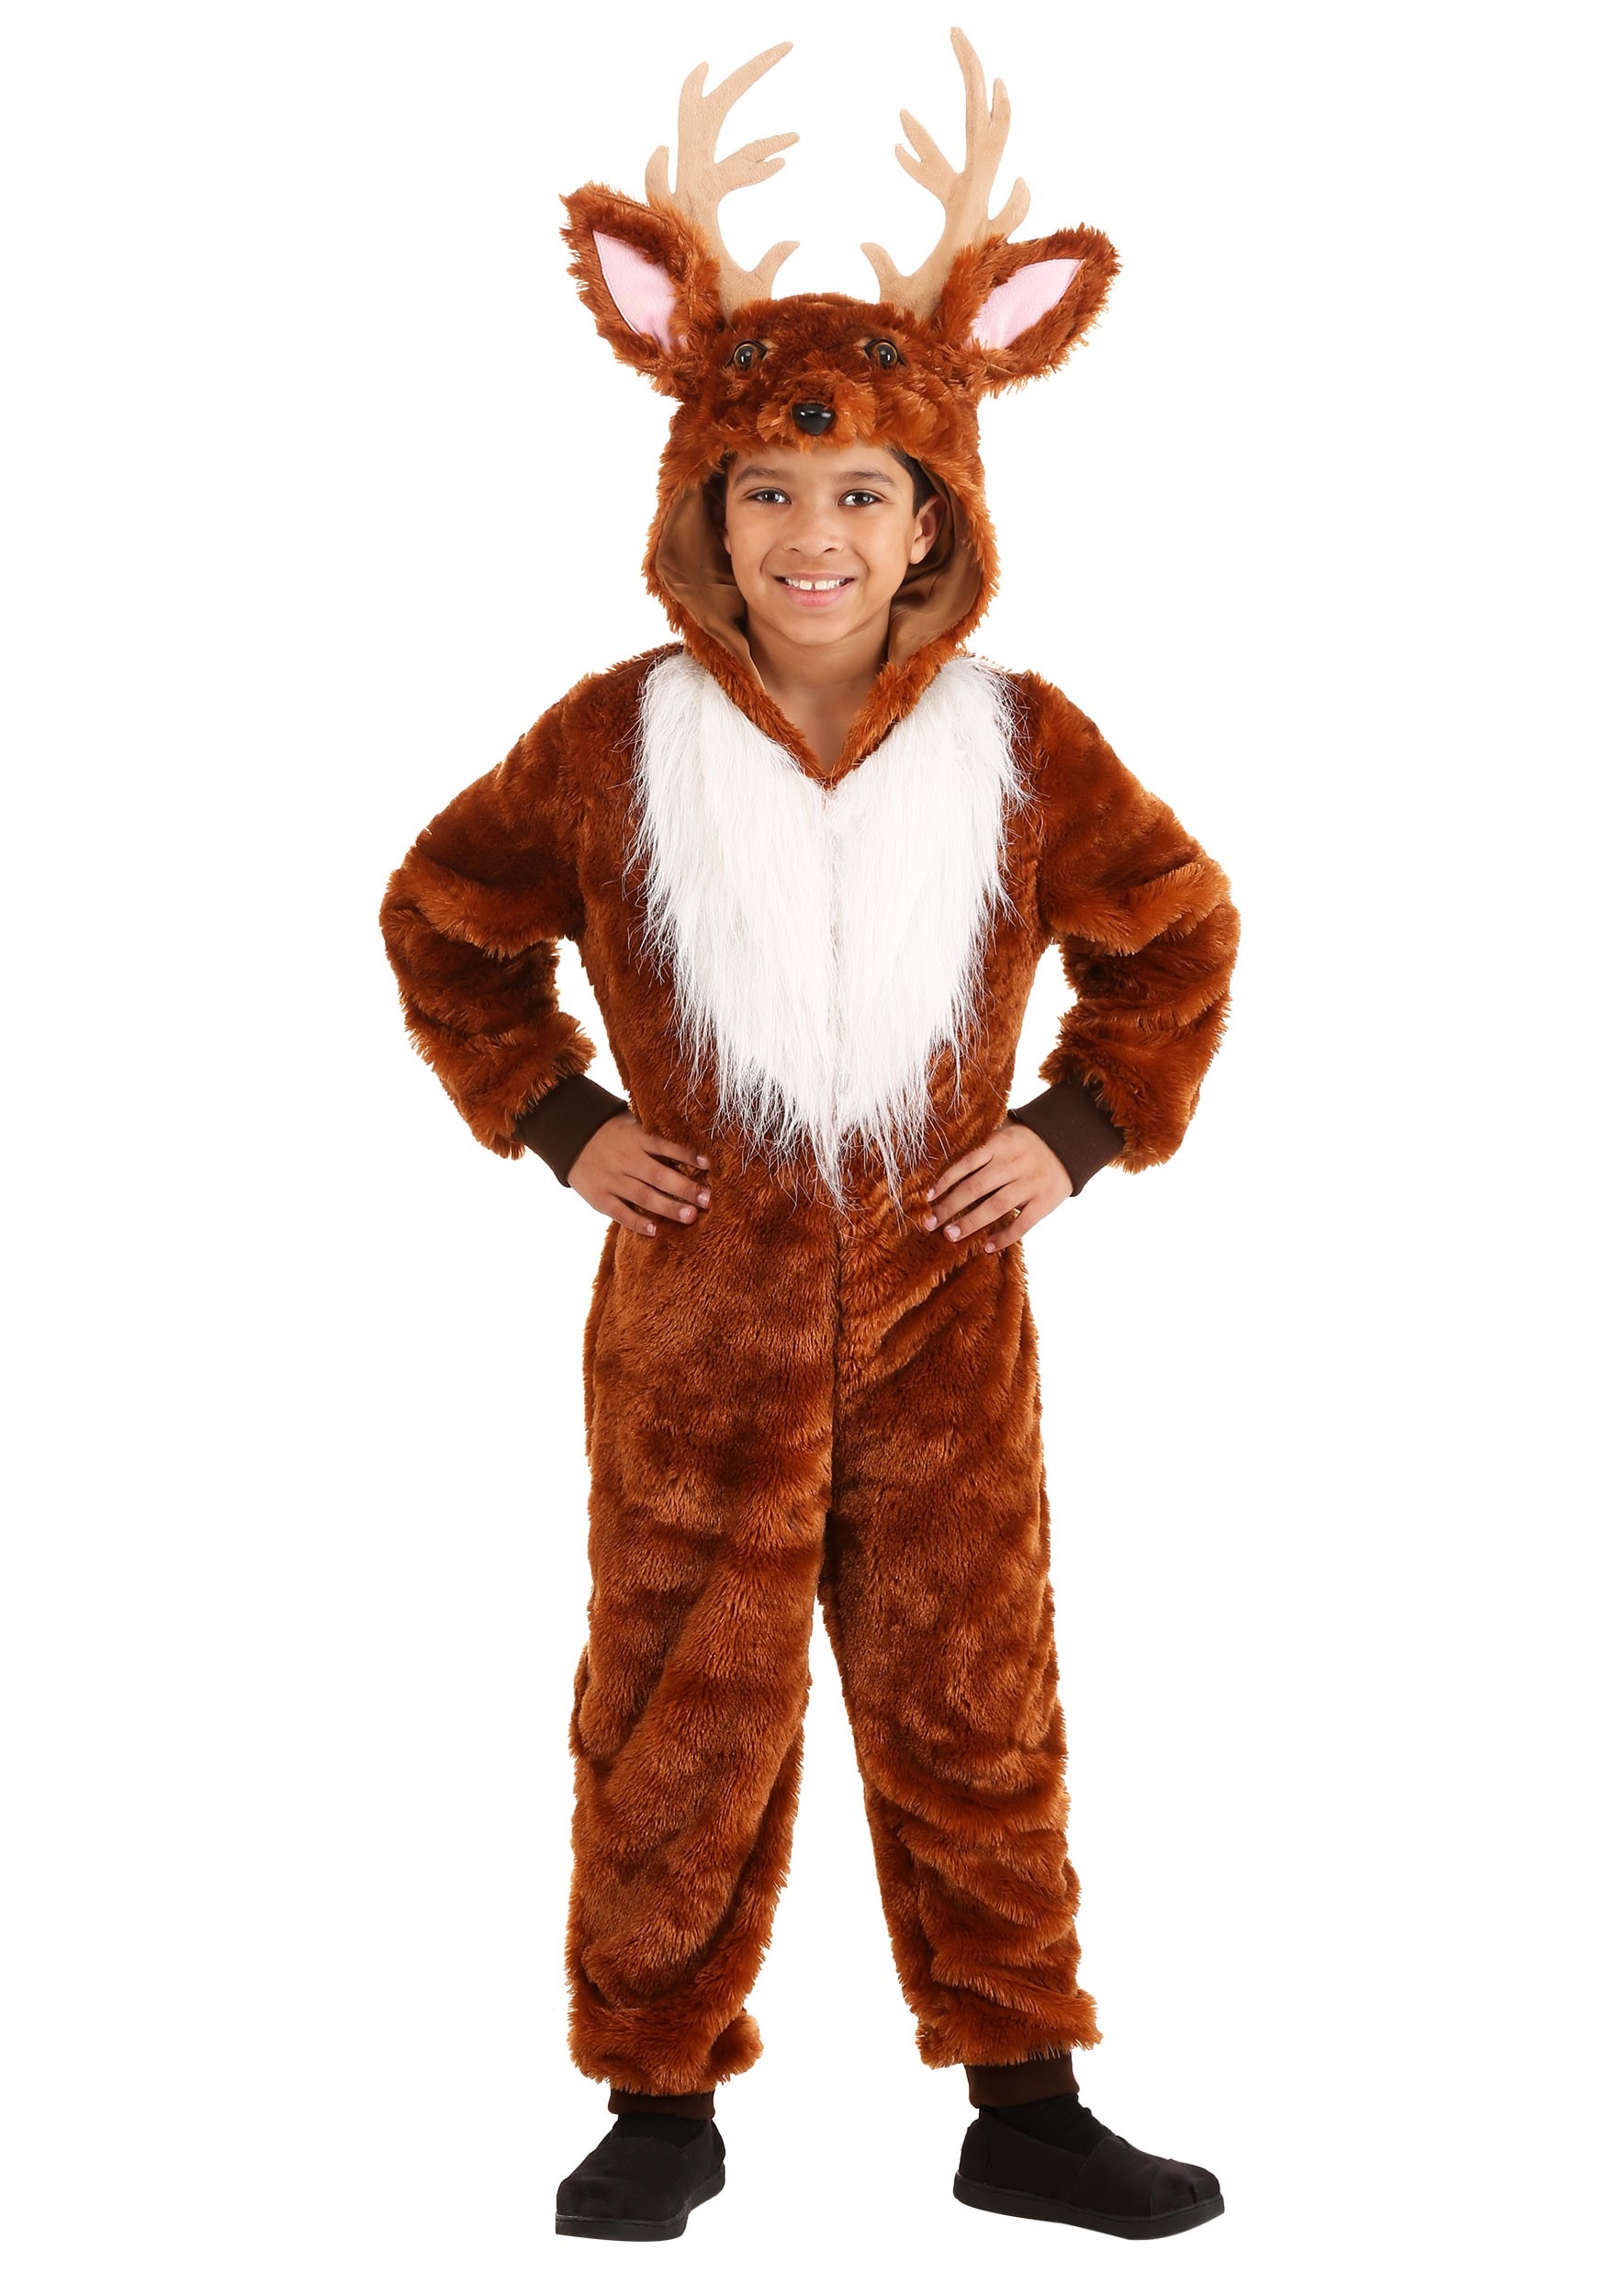 Child Deer Costume with Horns for Halloween 